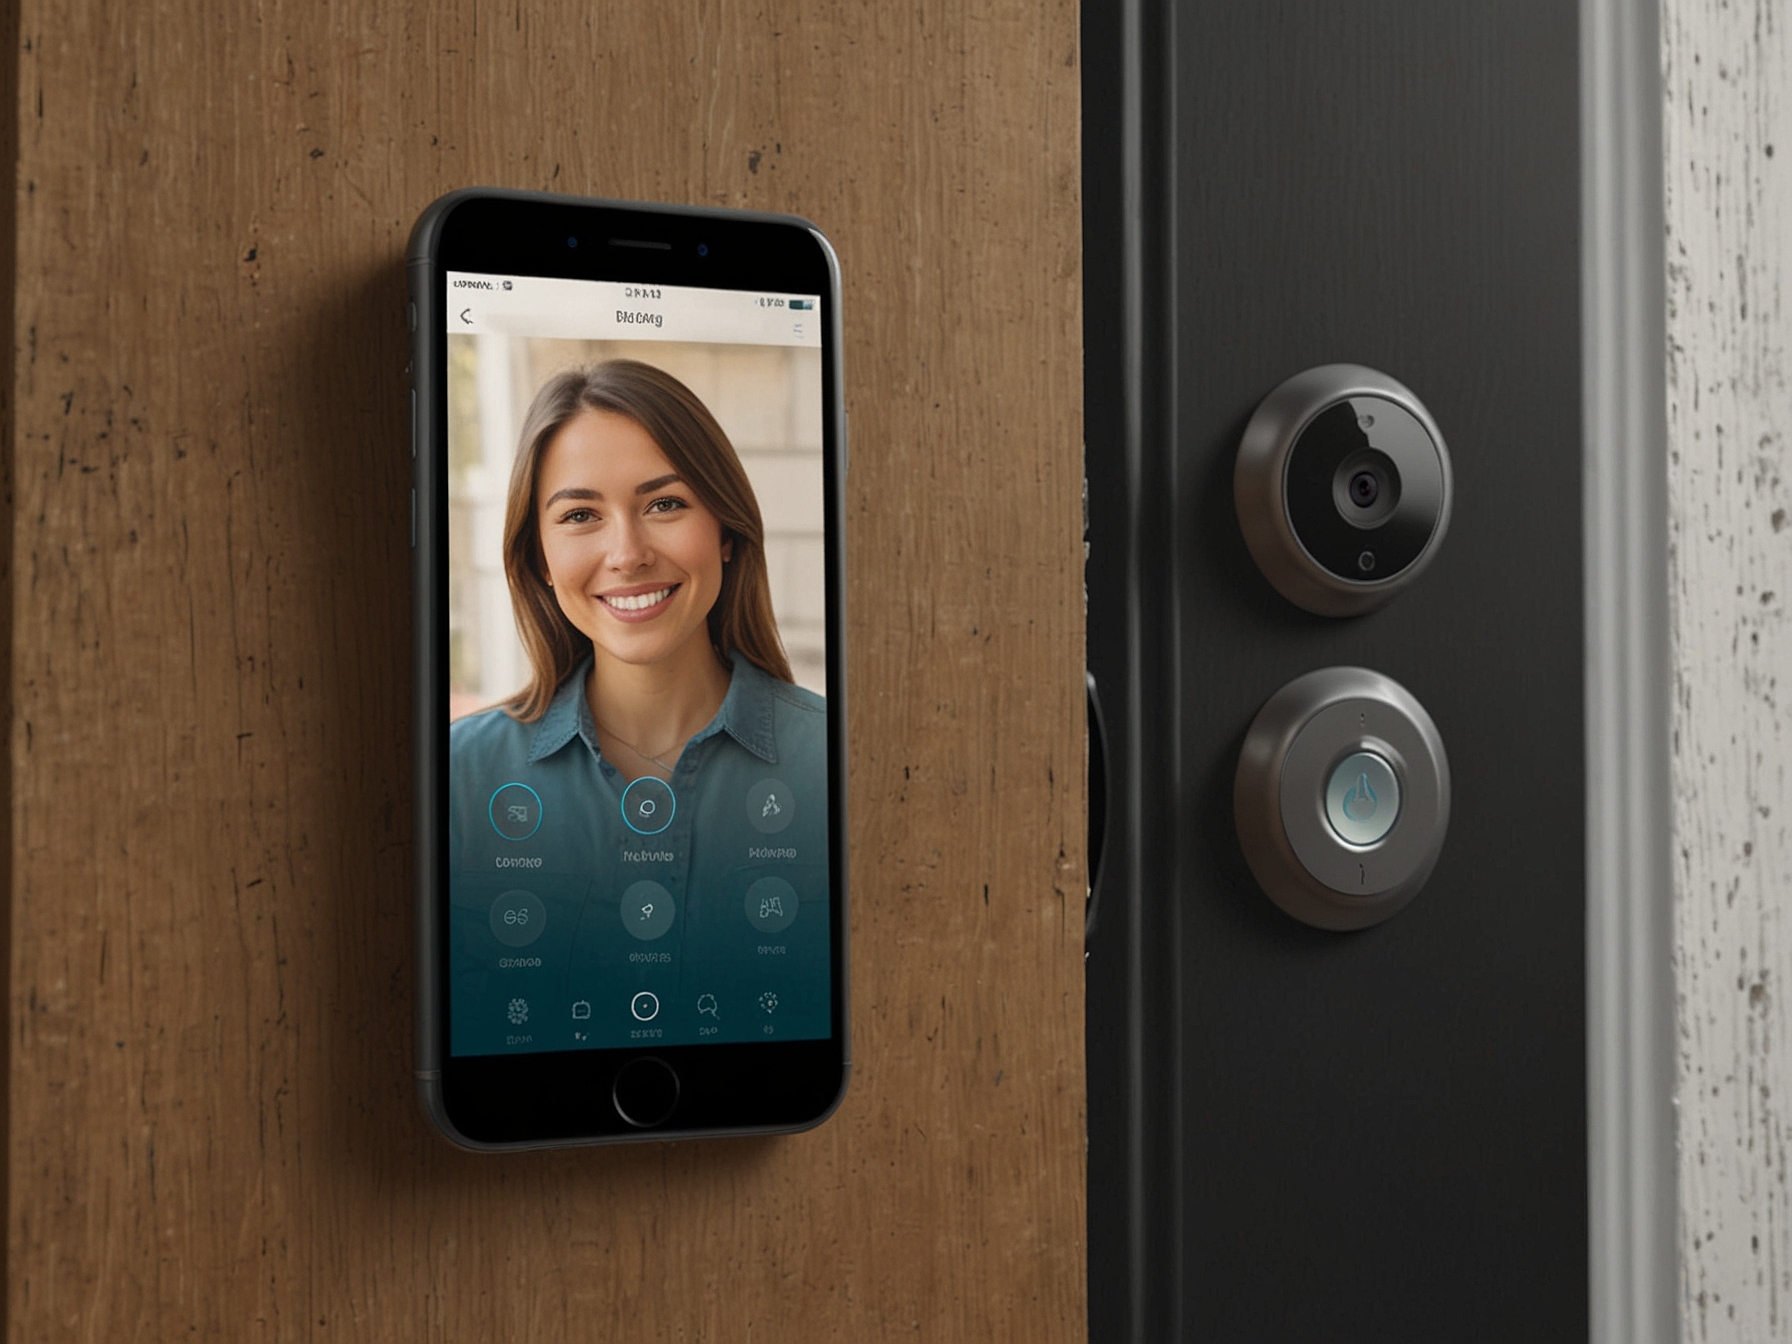 A smartphone displaying the Ring app interface with real-time notifications and live video feed from the Ring Video Doorbell. This image emphasizes the app's functionality and user convenience.